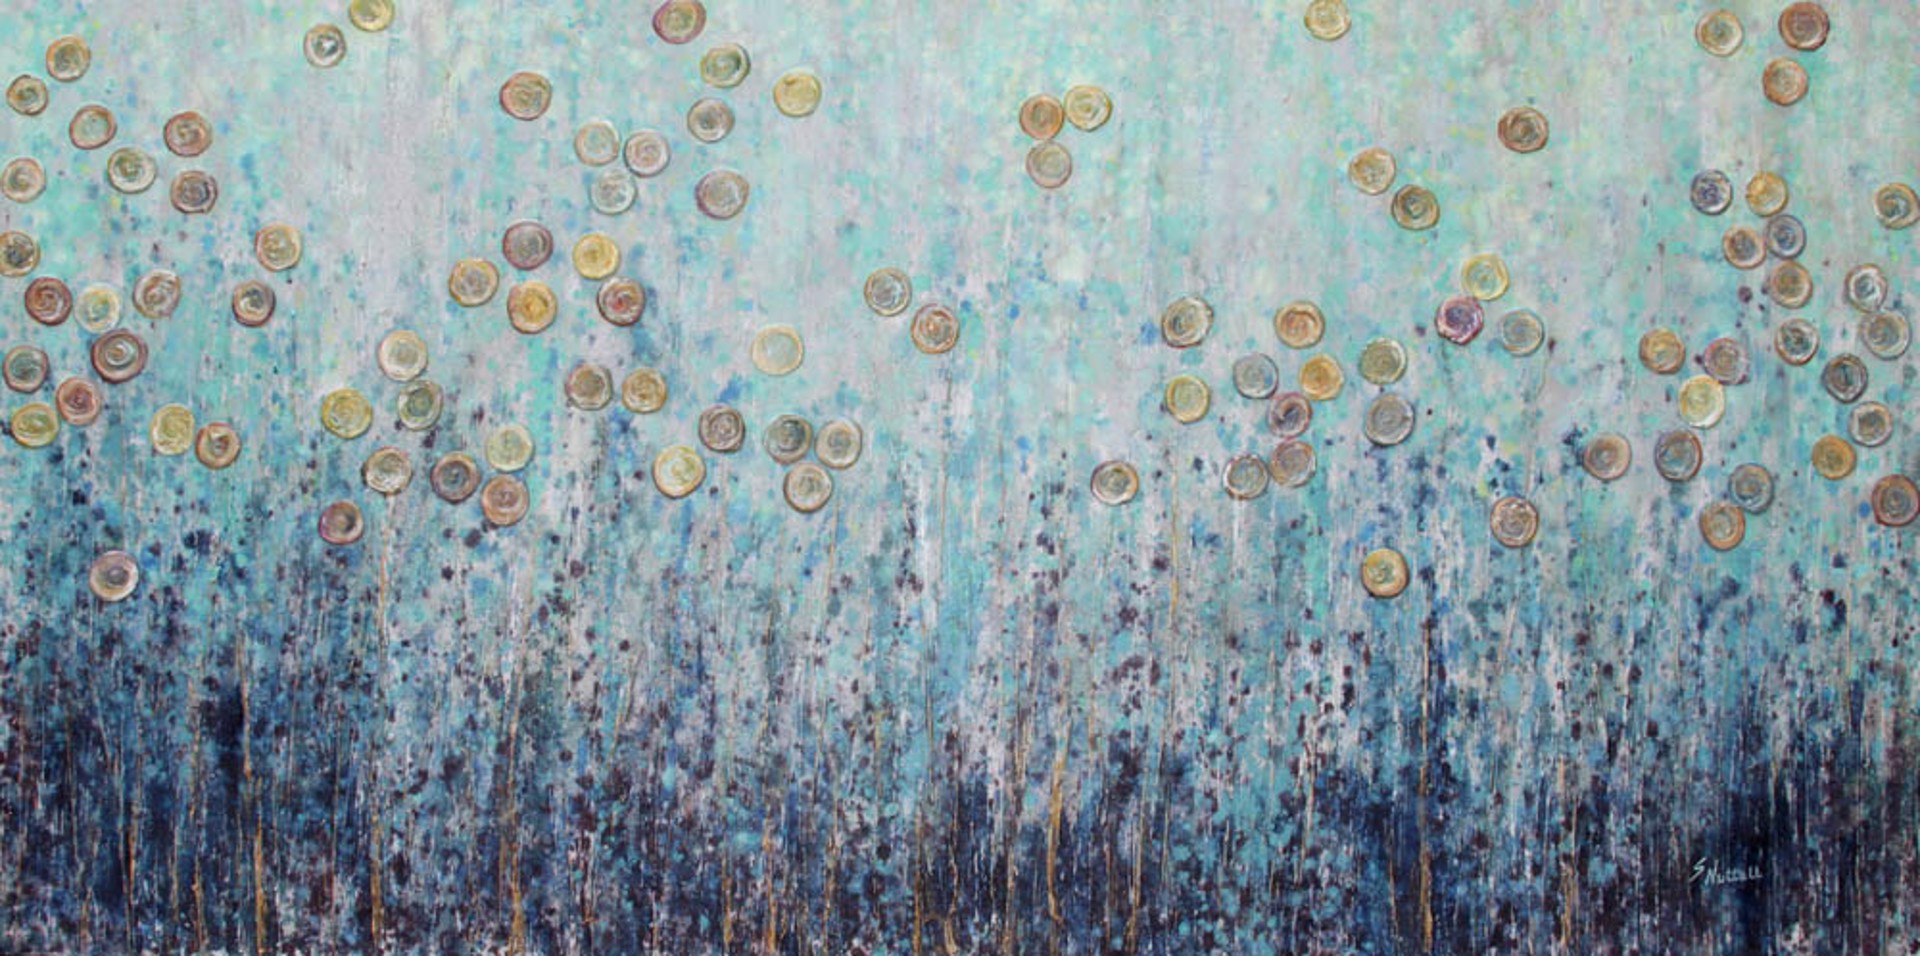 Silver Poppies by Susan Nuttall